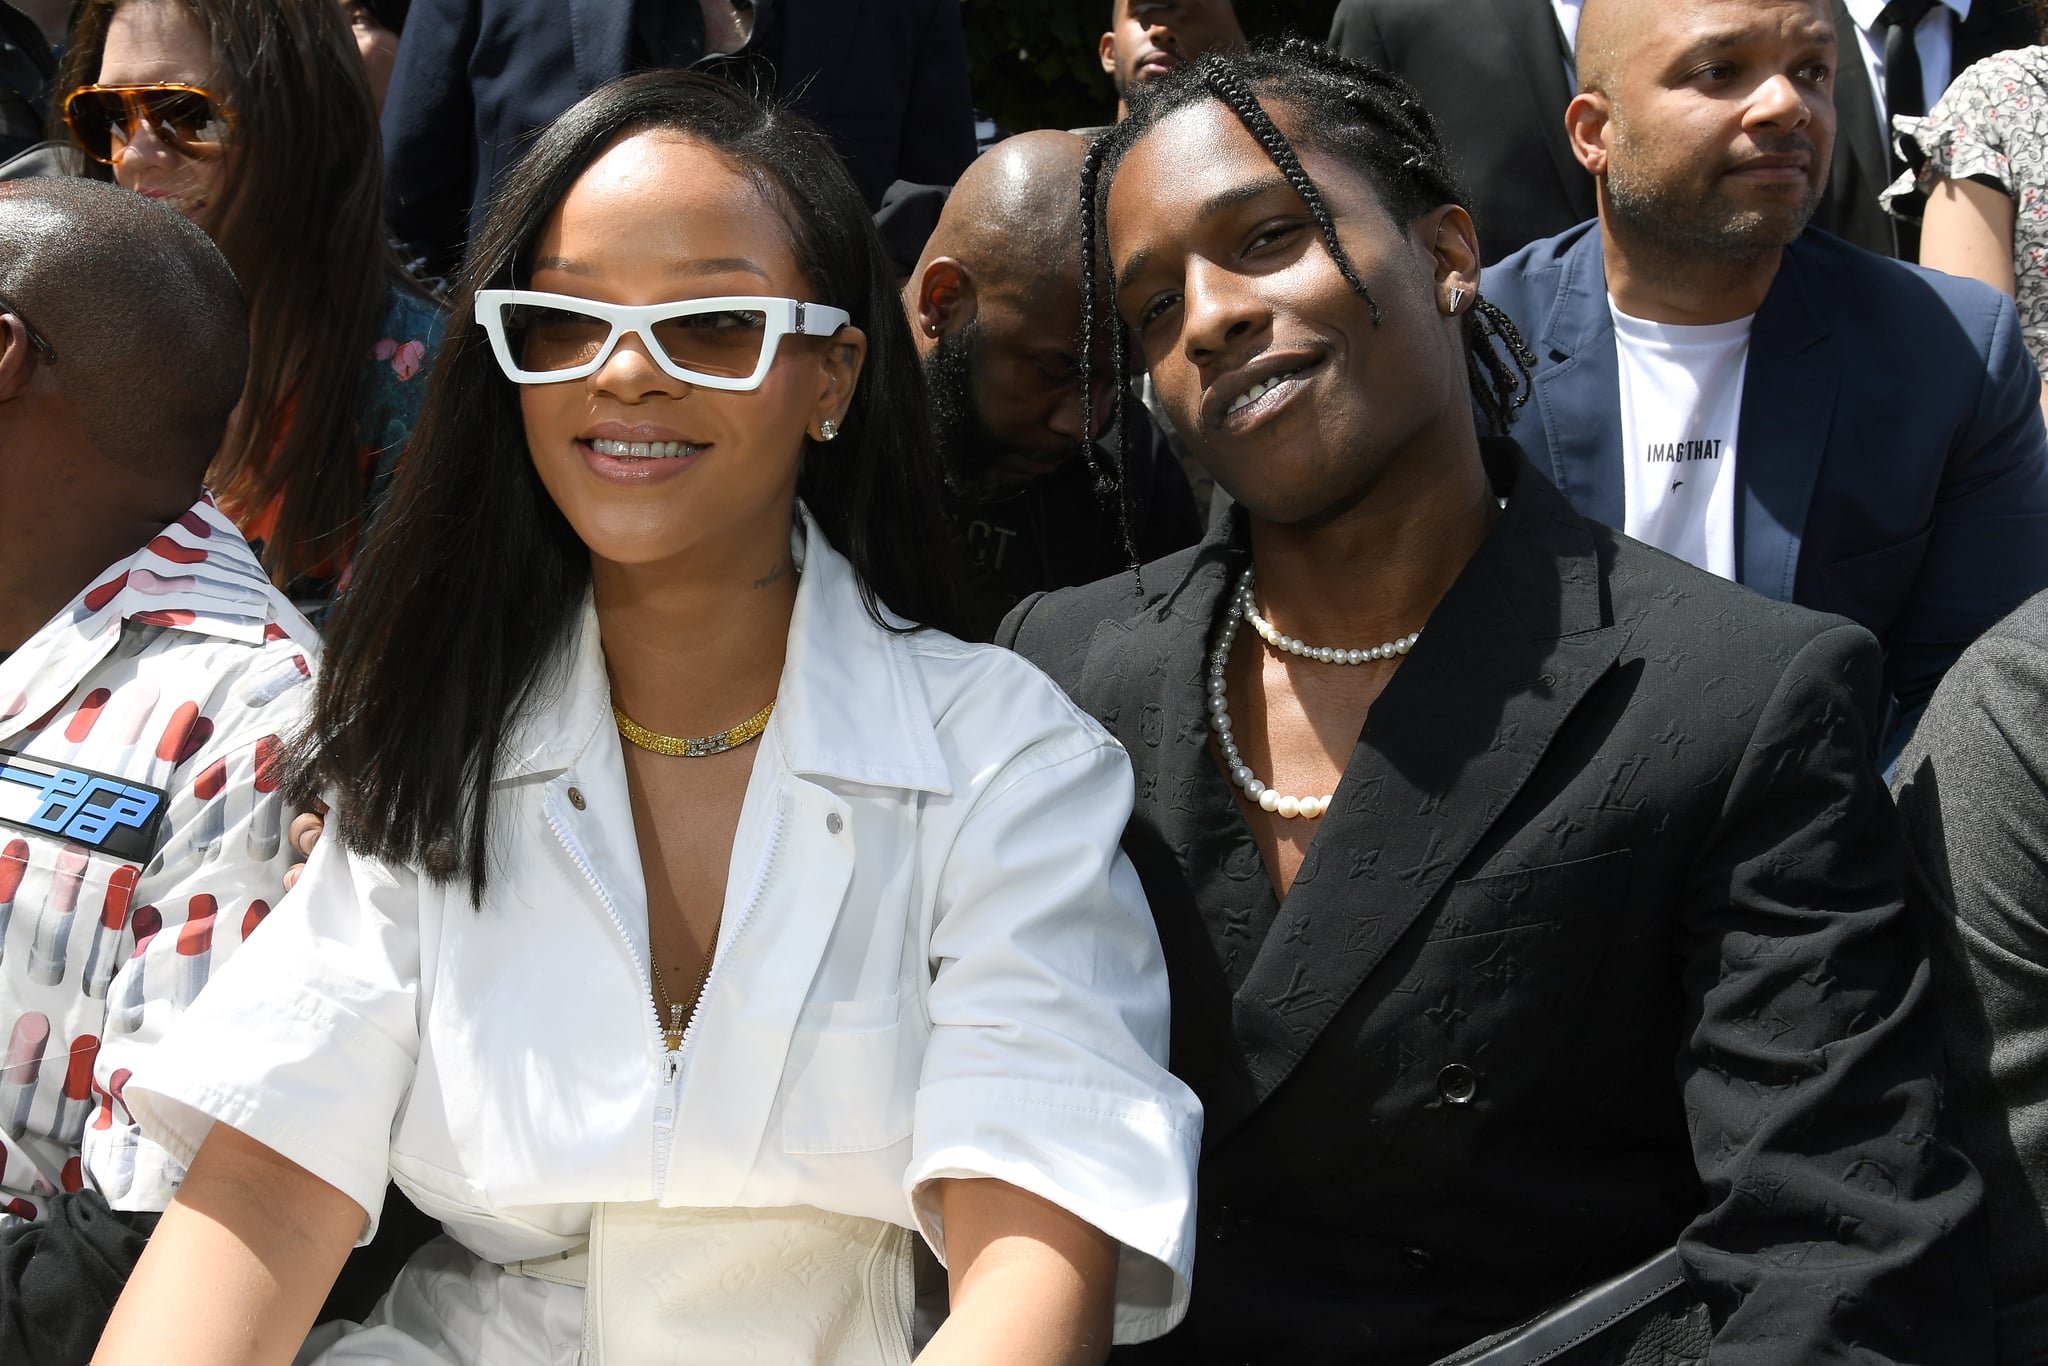 Mom and Dad date night at the #LouisVuitton show 🥰 #rihanna